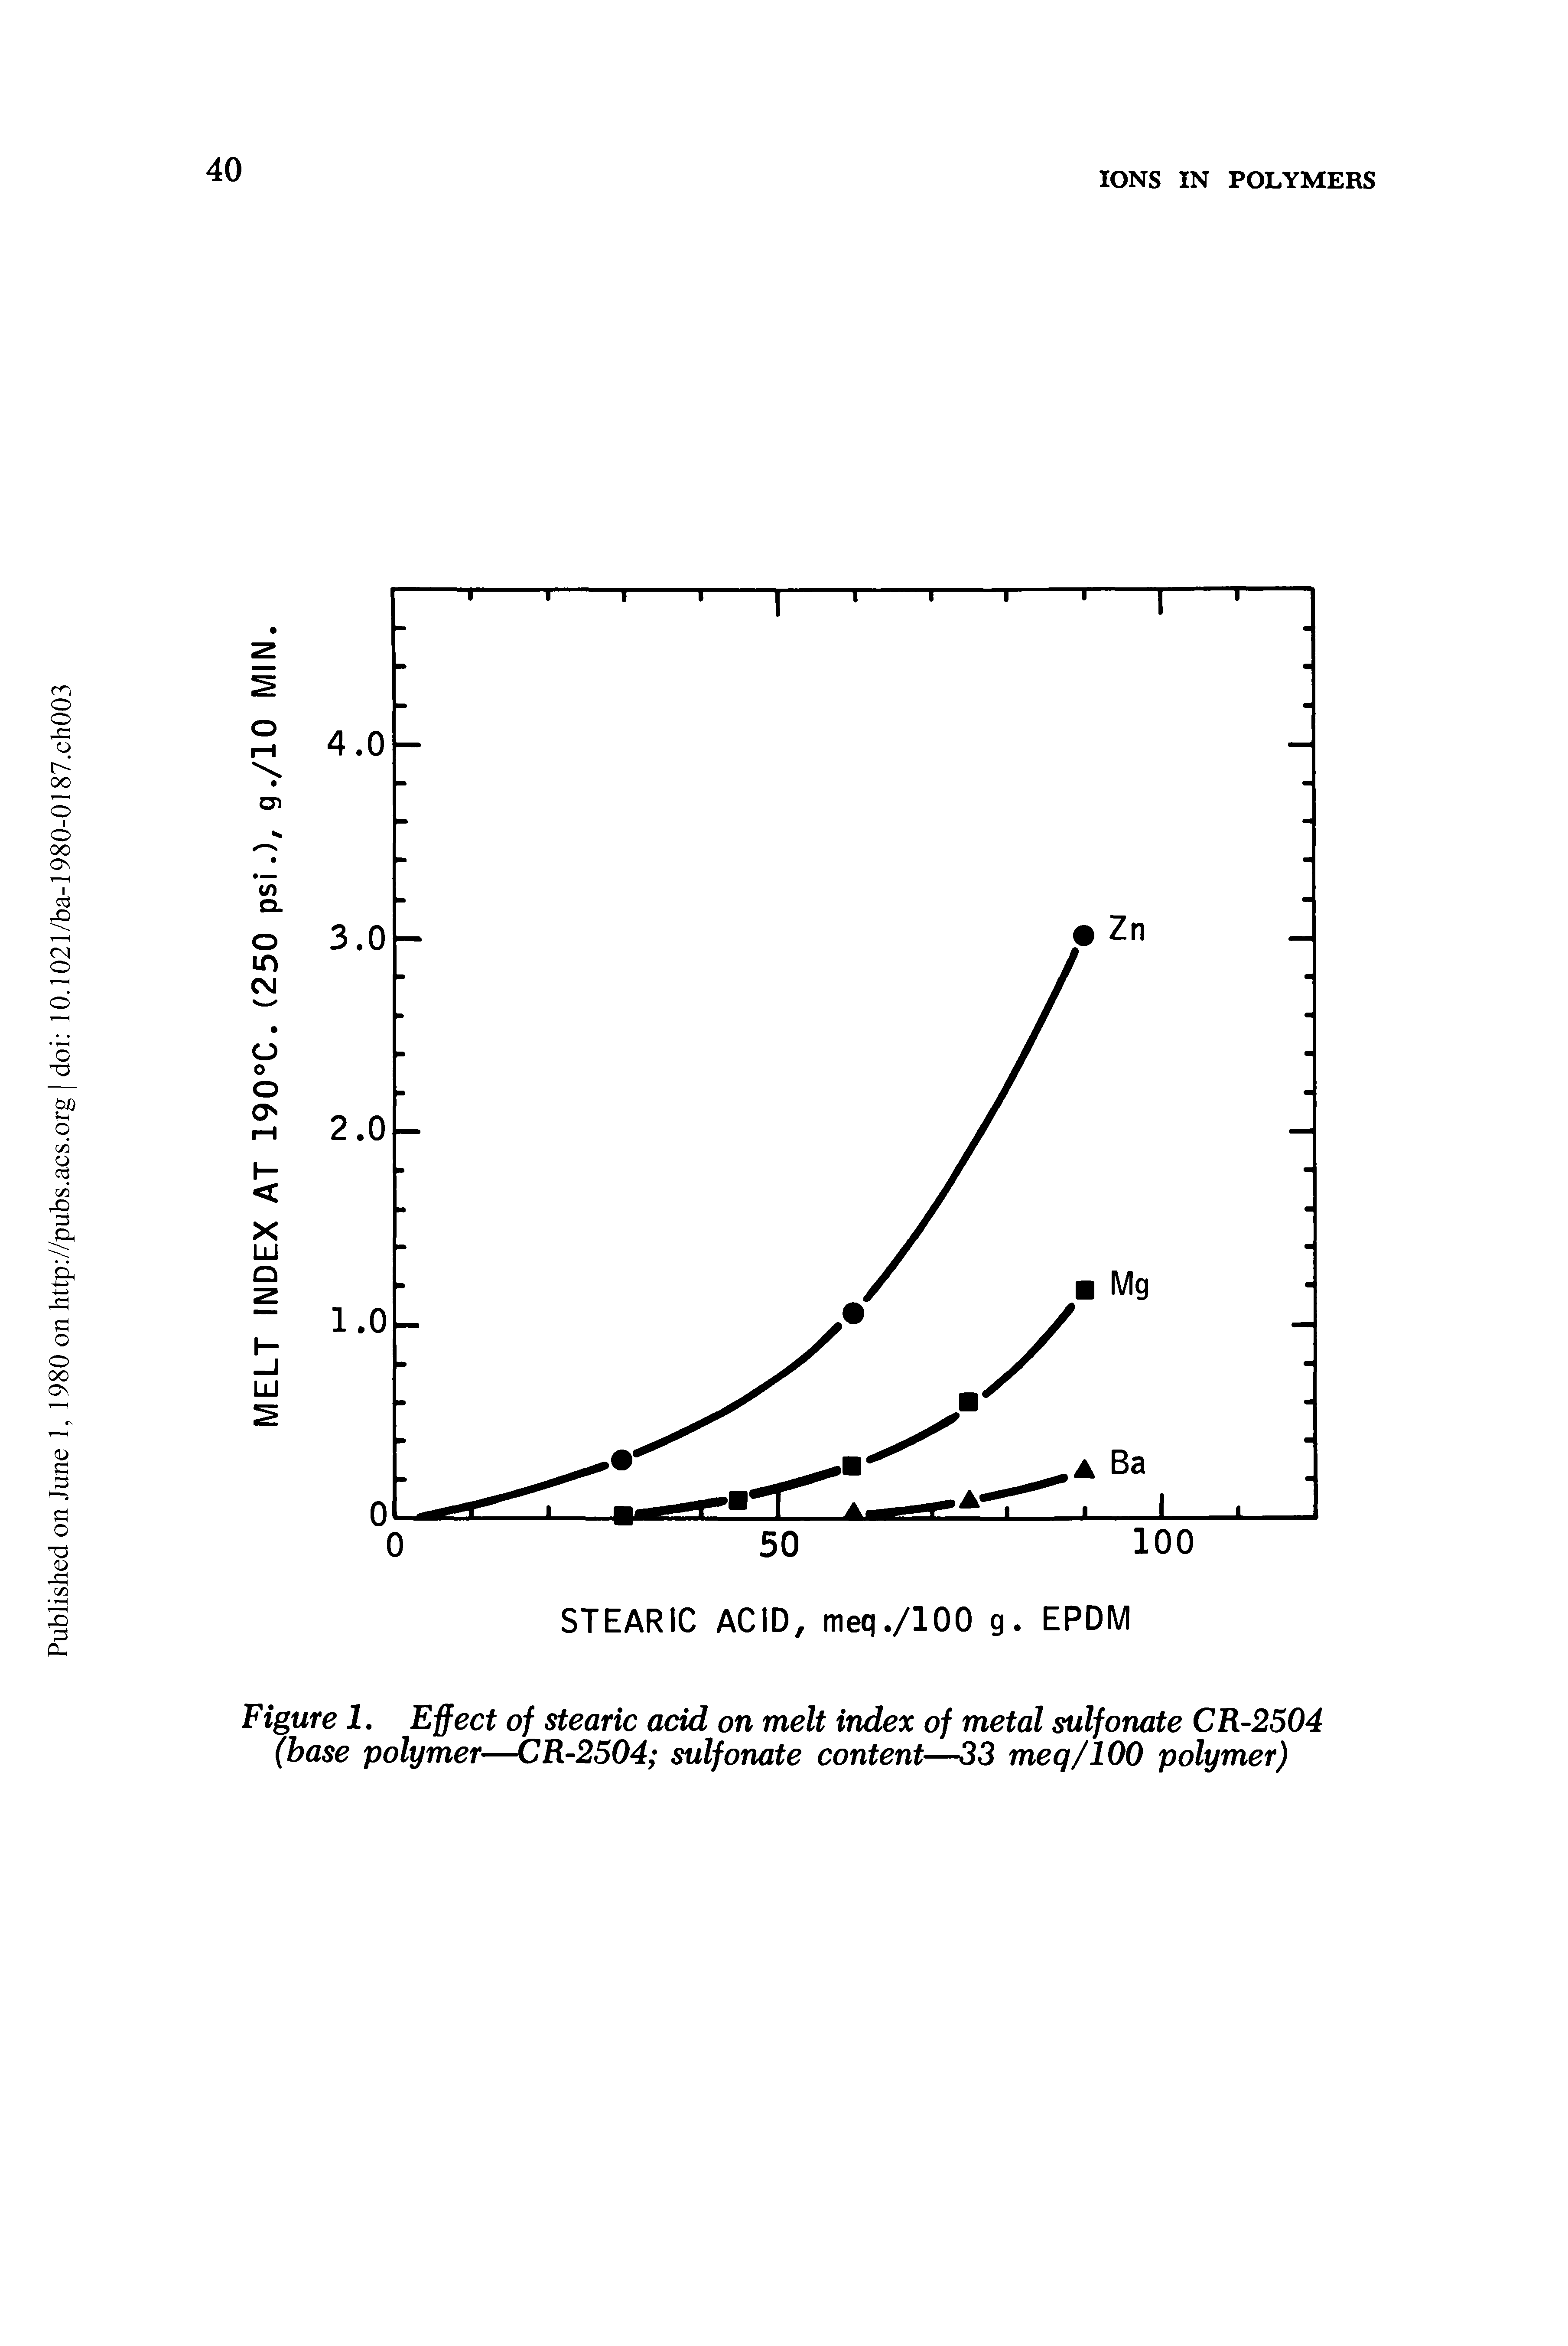 Figure 1. Effect of stearic add on melt index of metal sulfonate CR-2504 (base polymer—CR-2504 sulfonate content—33 meq/100 polymer)...